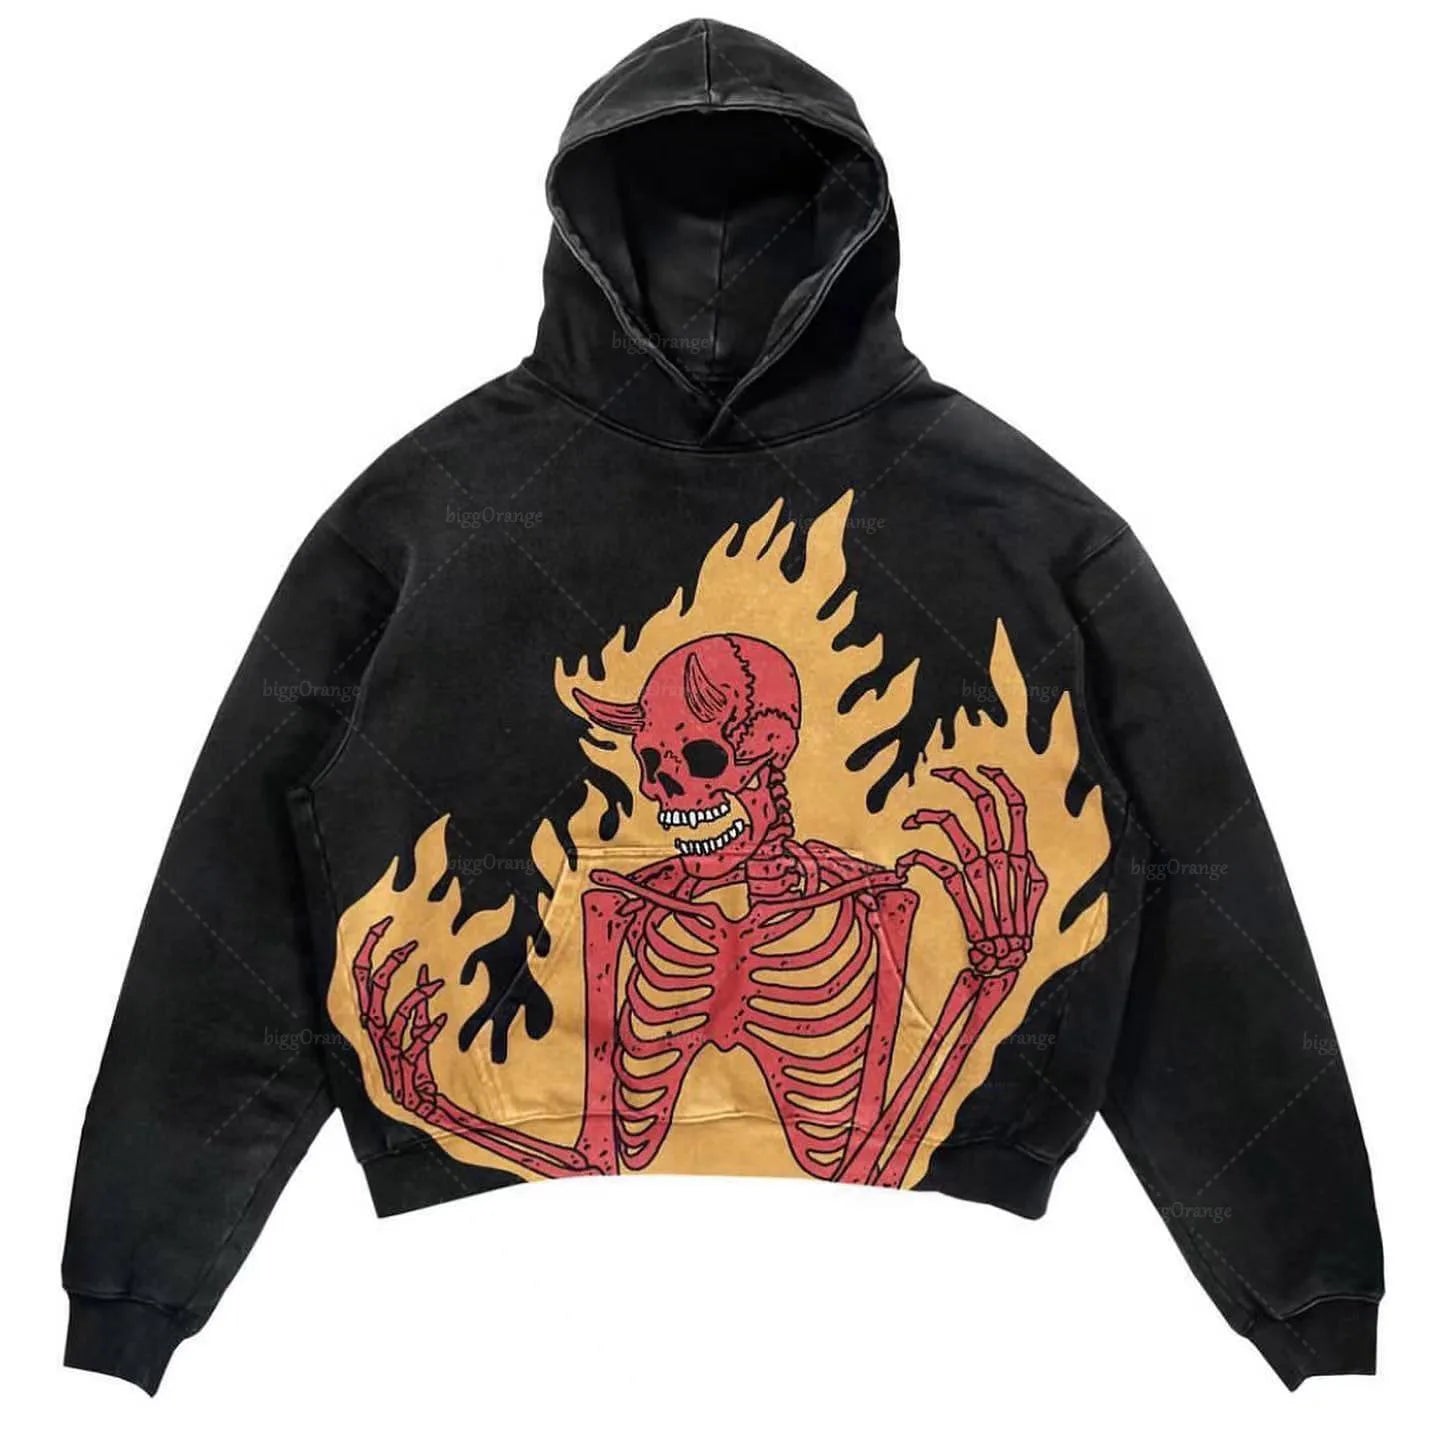 A black Maramalive™ Explosions Printed Skull Y2K Retro Hooded Sweater Coat Street Style Gothic Casual Fashion Hooded Sweater Men's Female featuring a large graphic of a red skeletal figure with horns, surrounded by flames, evokes an edgy retro vibe perfect for any wardrobe.